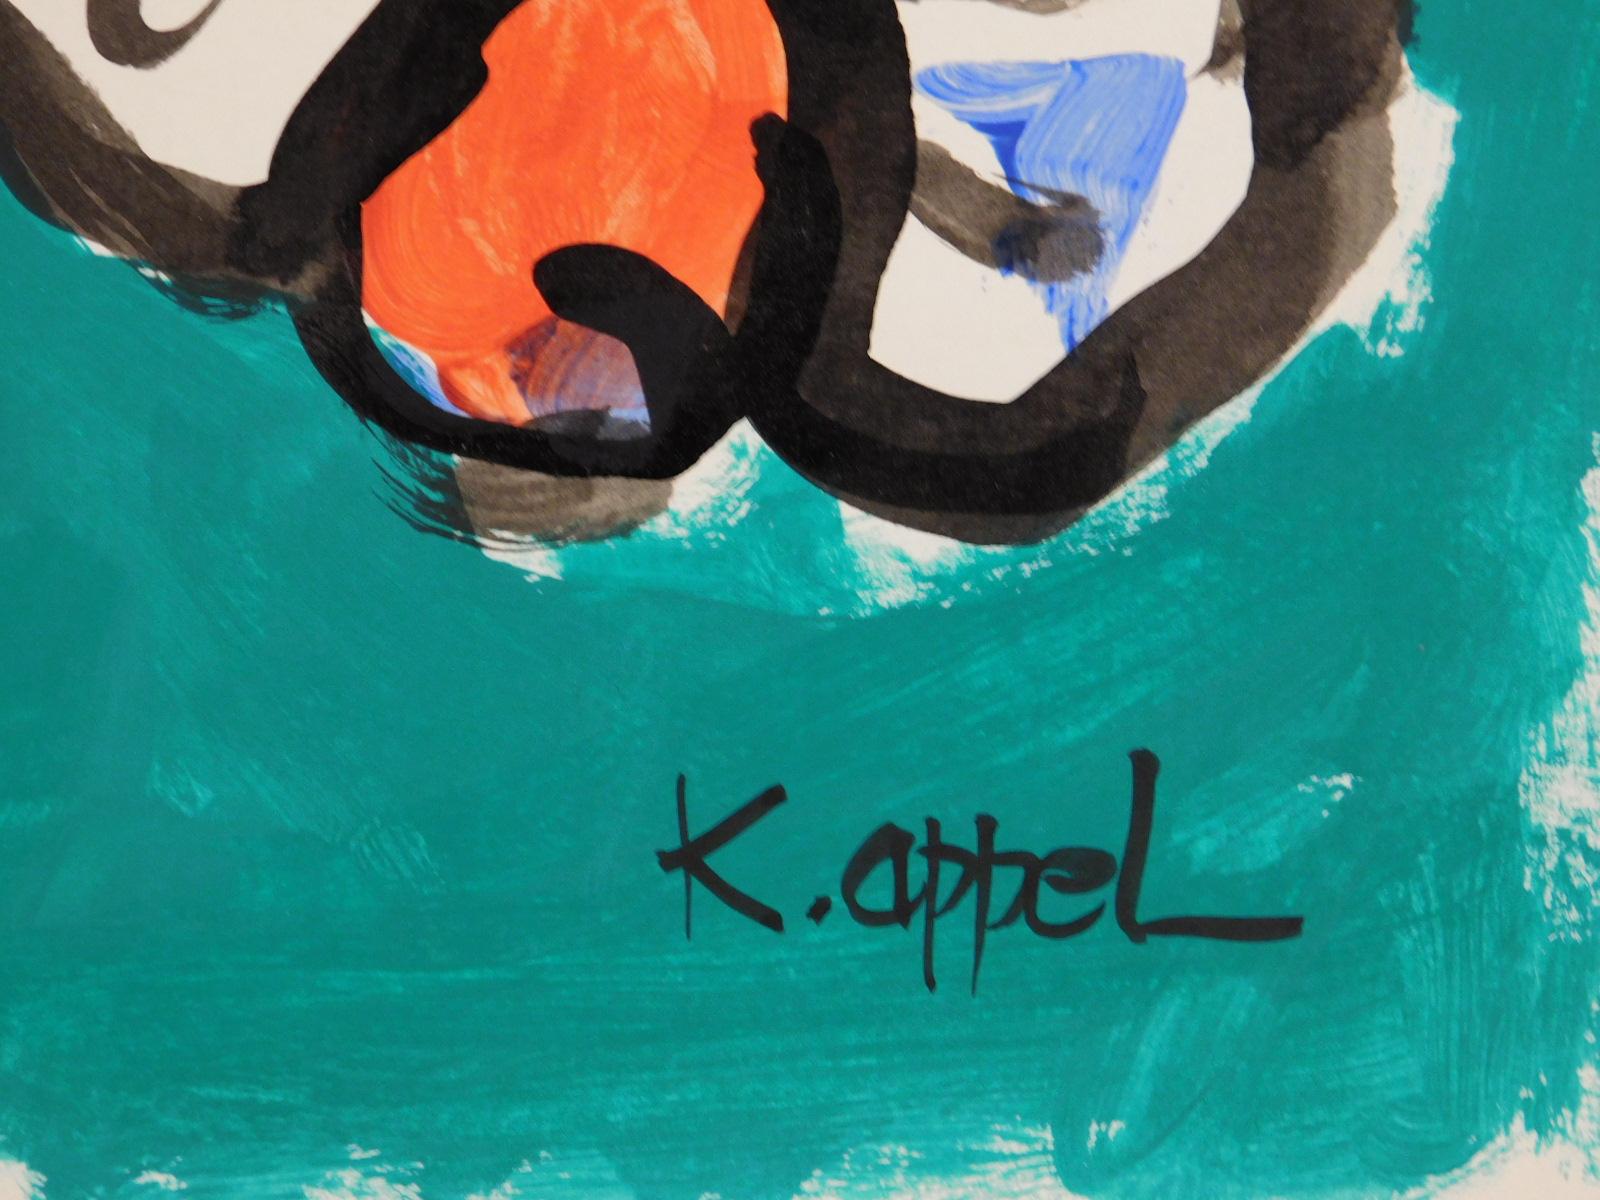 Karel Appel: Abstract Composition